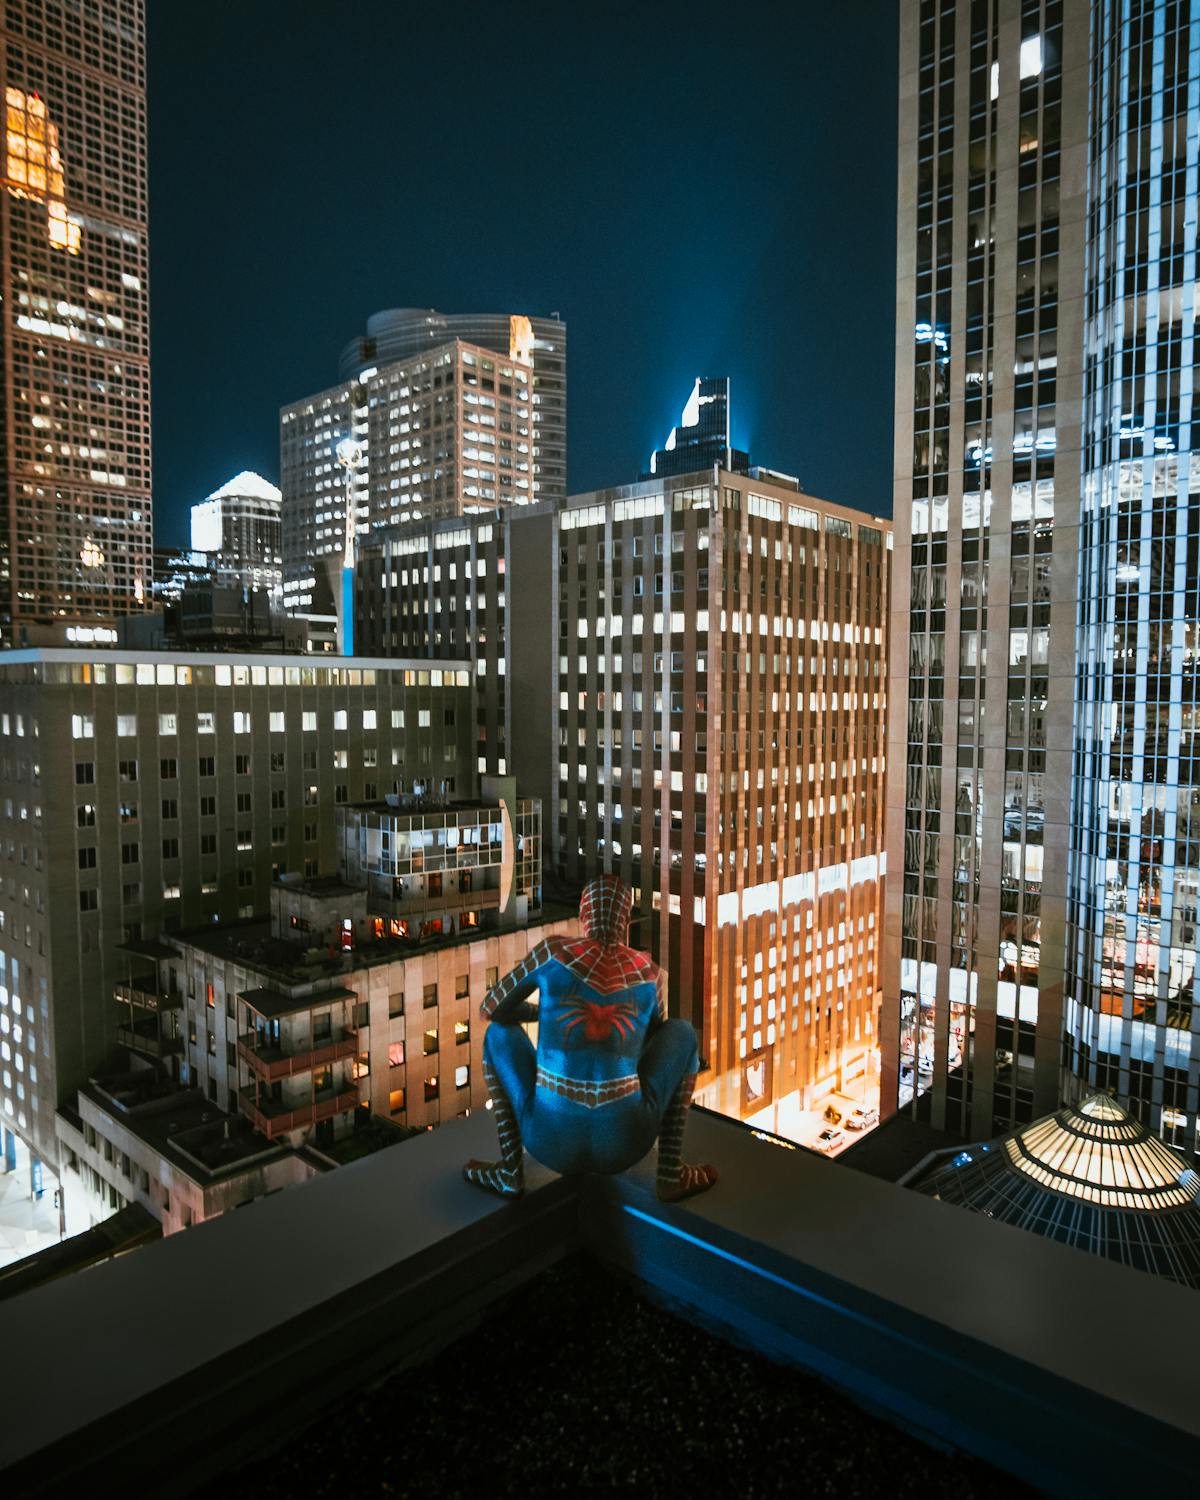 Spiderman on top of a high-rise building